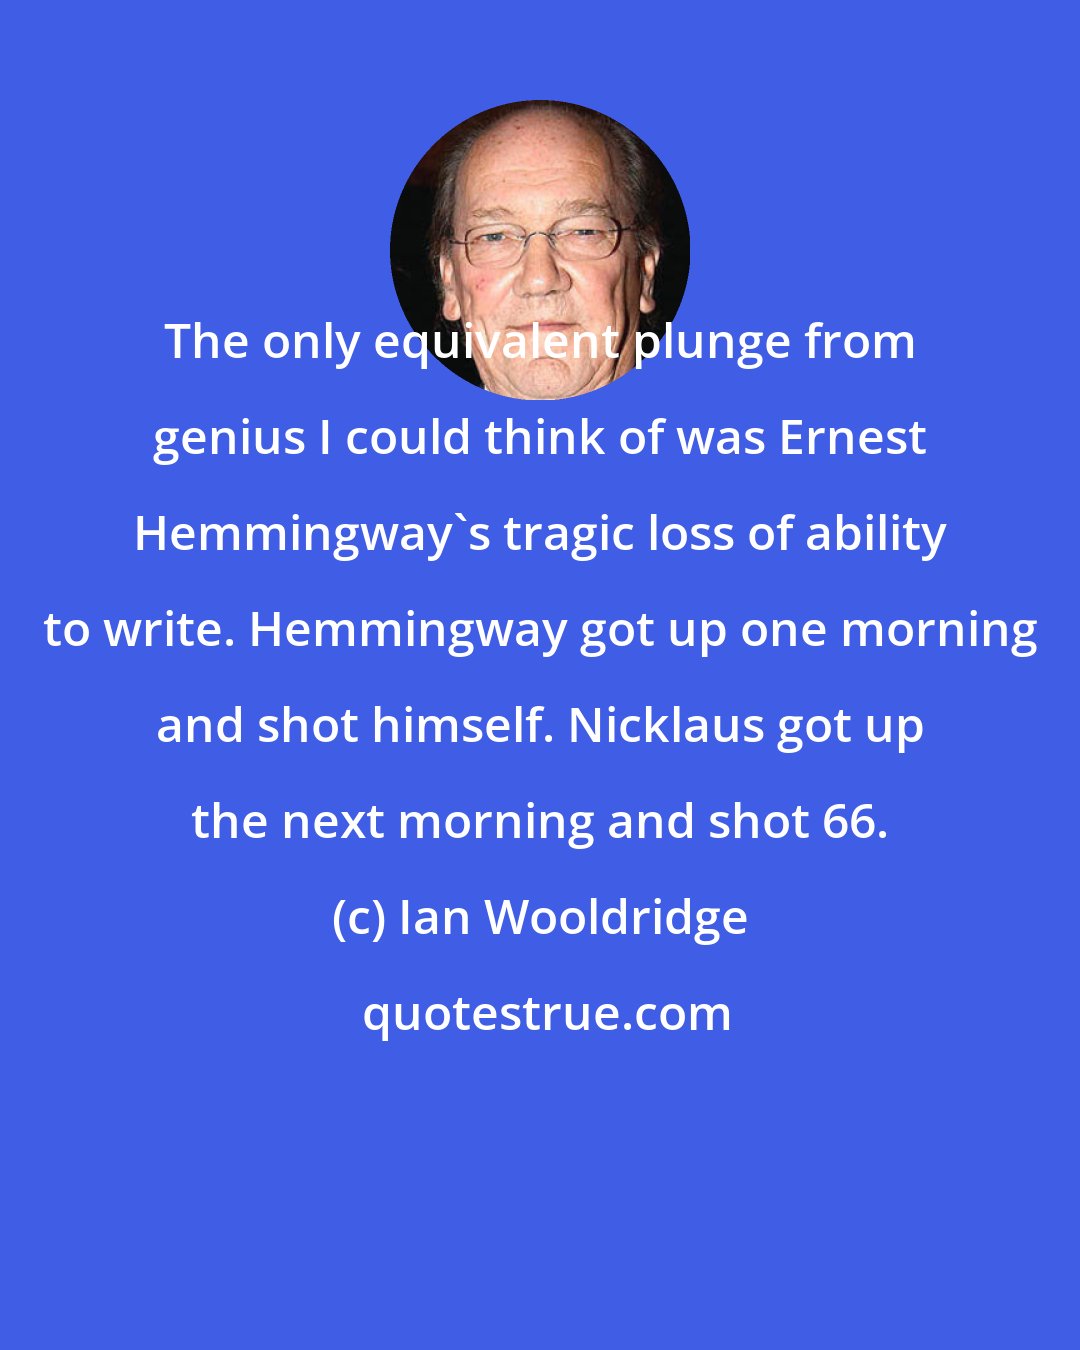 Ian Wooldridge: The only equivalent plunge from genius I could think of was Ernest Hemmingway's tragic loss of ability to write. Hemmingway got up one morning and shot himself. Nicklaus got up the next morning and shot 66.